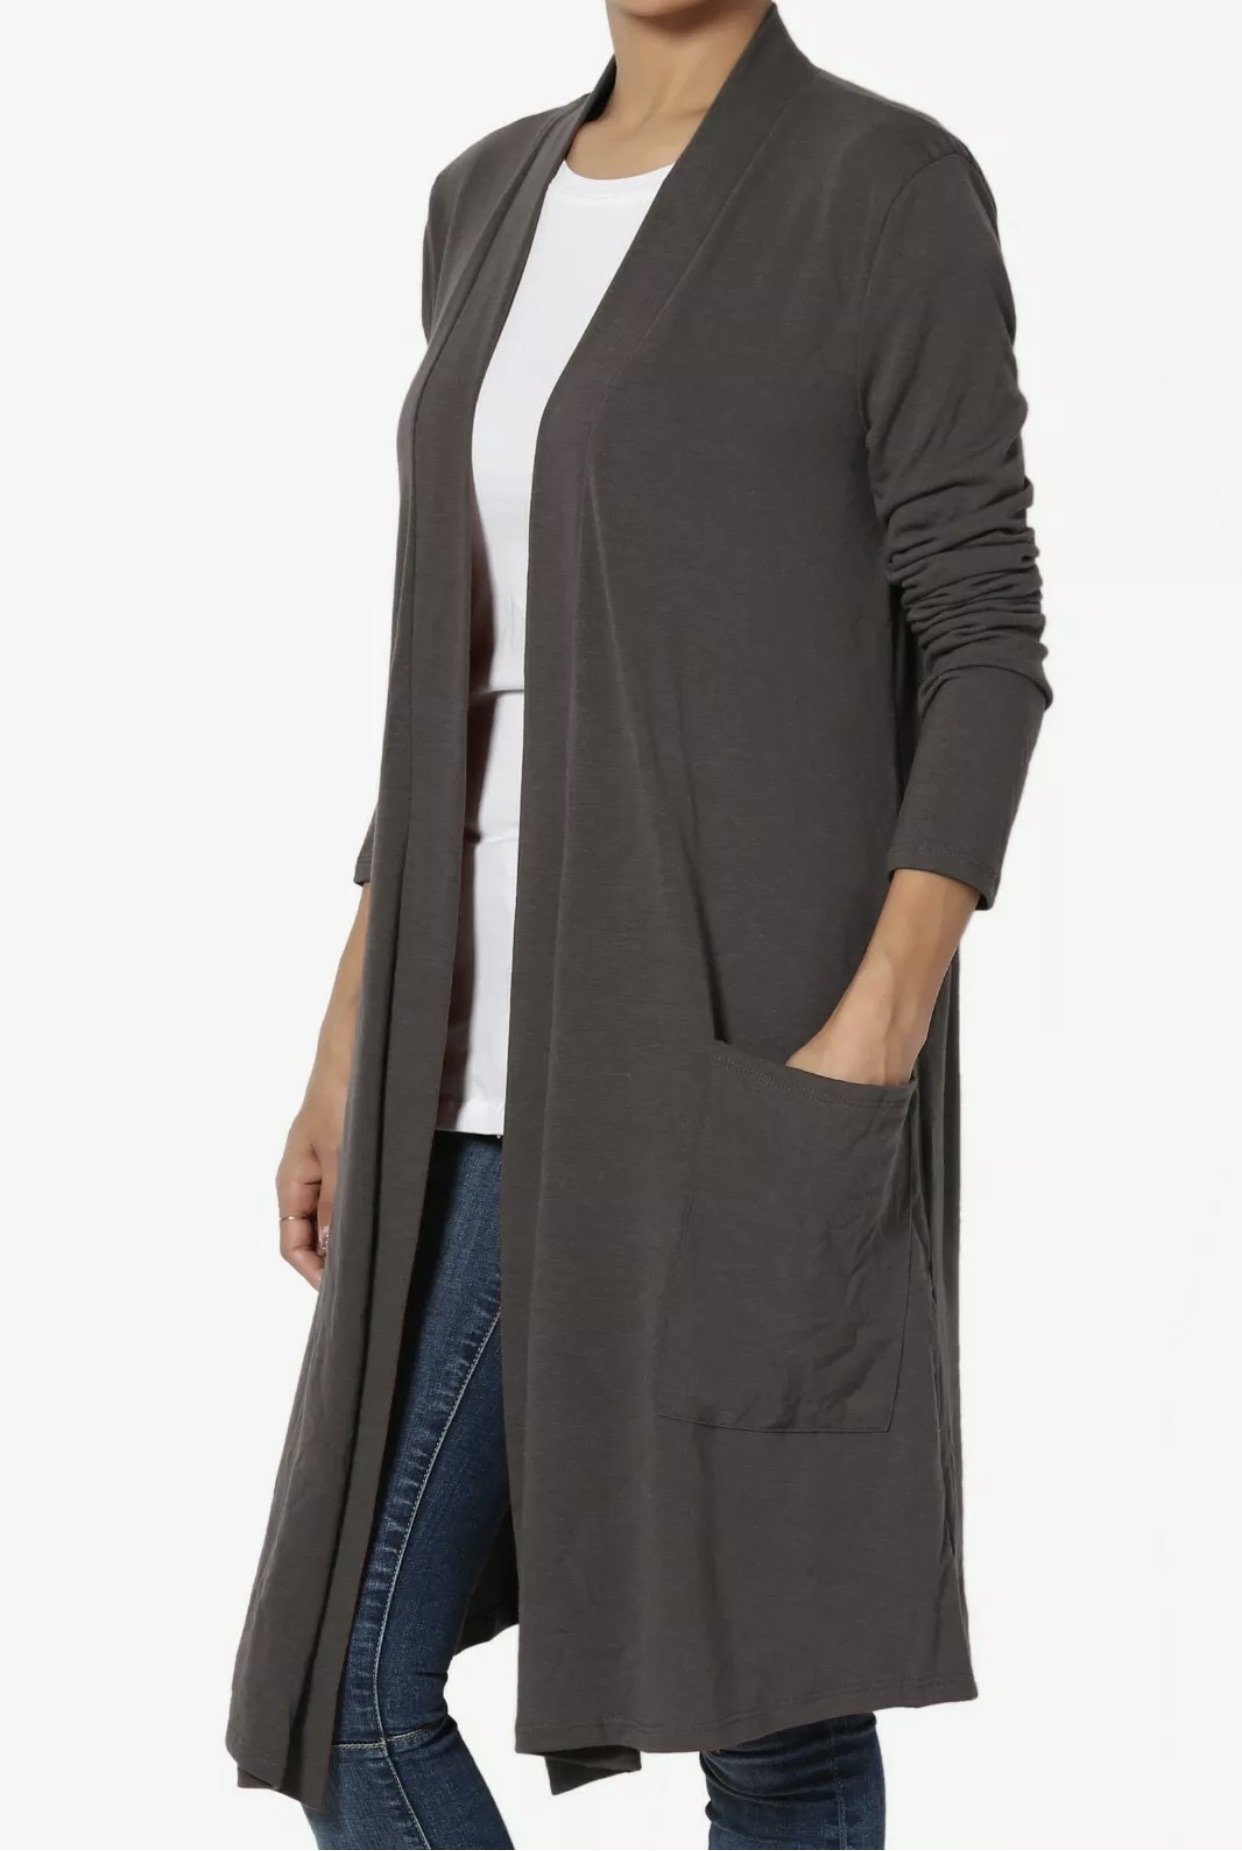 Womens Gray Pocket Cardigan Cardigan MomMe and More 